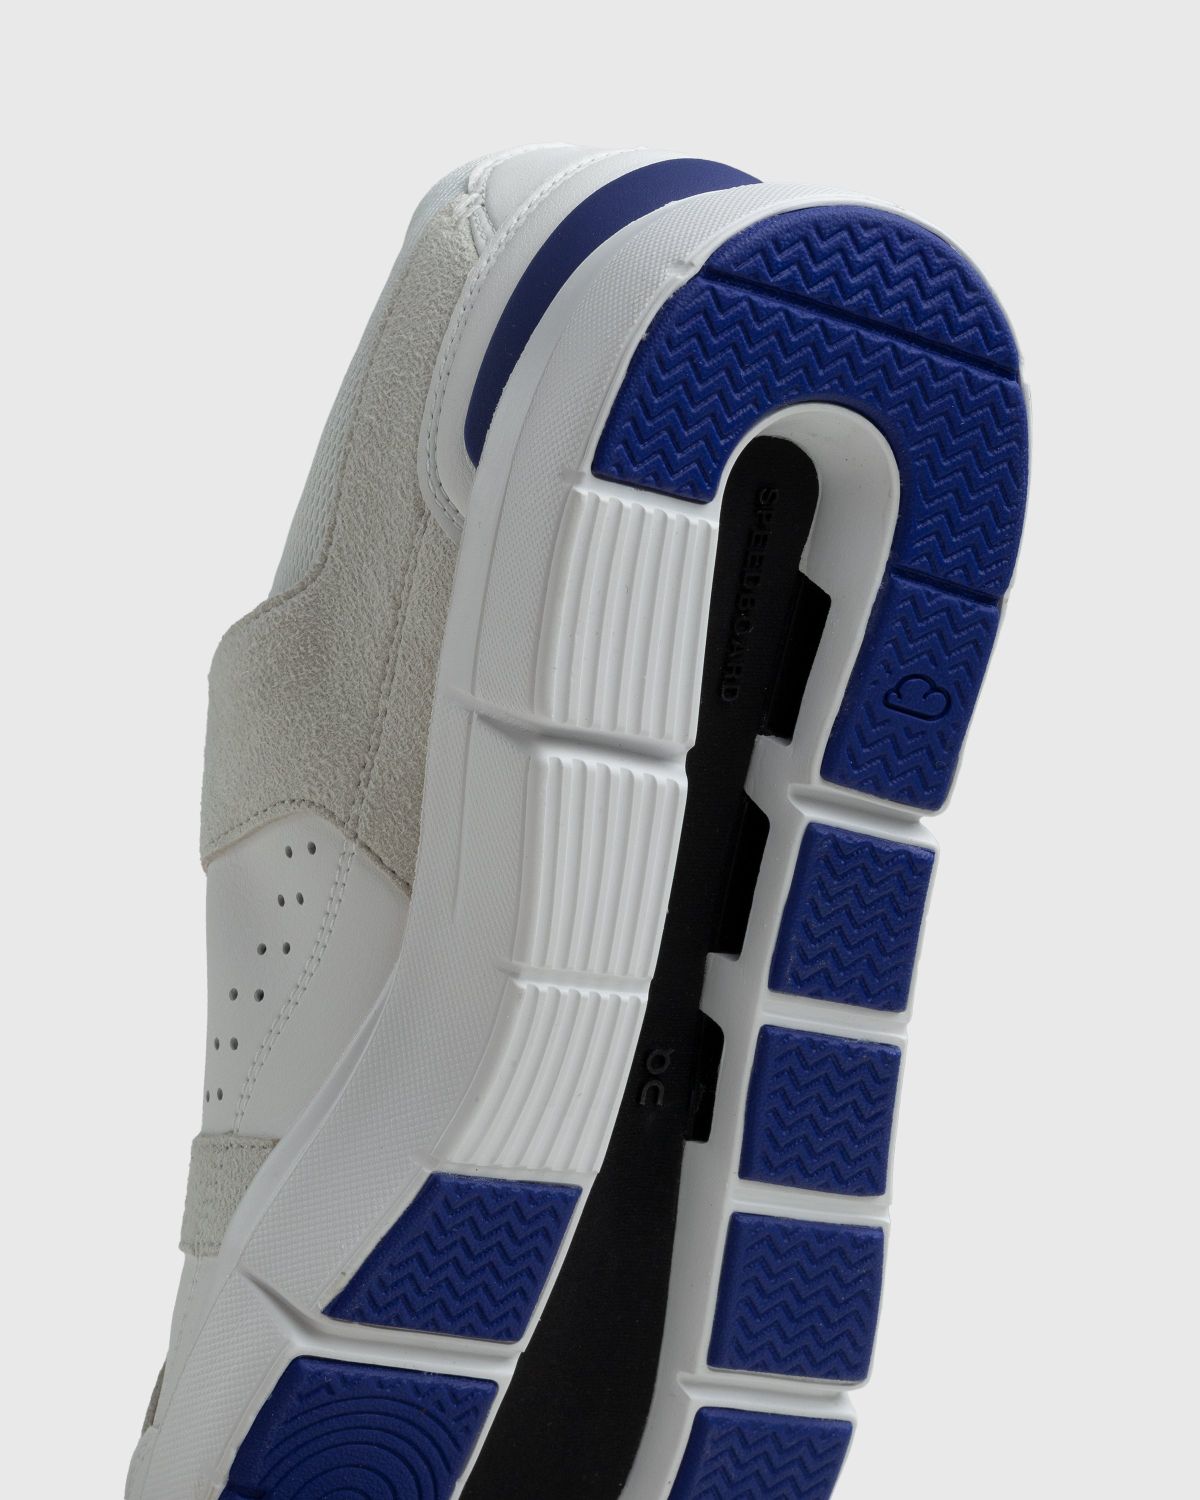 On – THE ROGER Clubhouse White/Indigo - Low Top Sneakers - White - Image 6